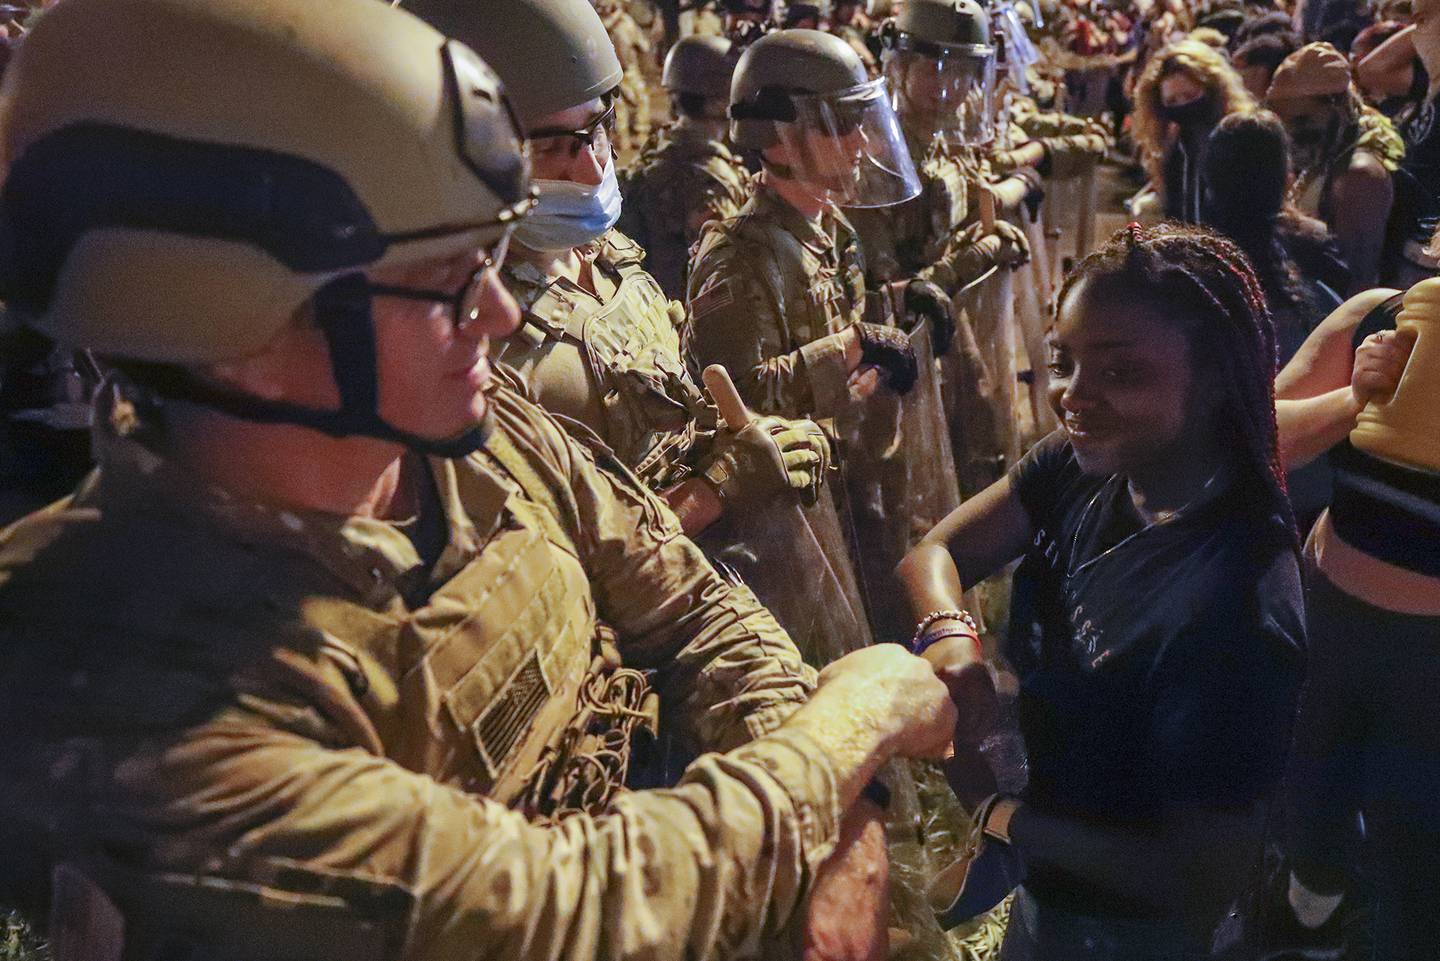 A Utah National Guard solider fist-bumps with a demonstrator as protests over the death of George Floyd continue, Wednesday, June 3, 2020, near the White House in Washington.